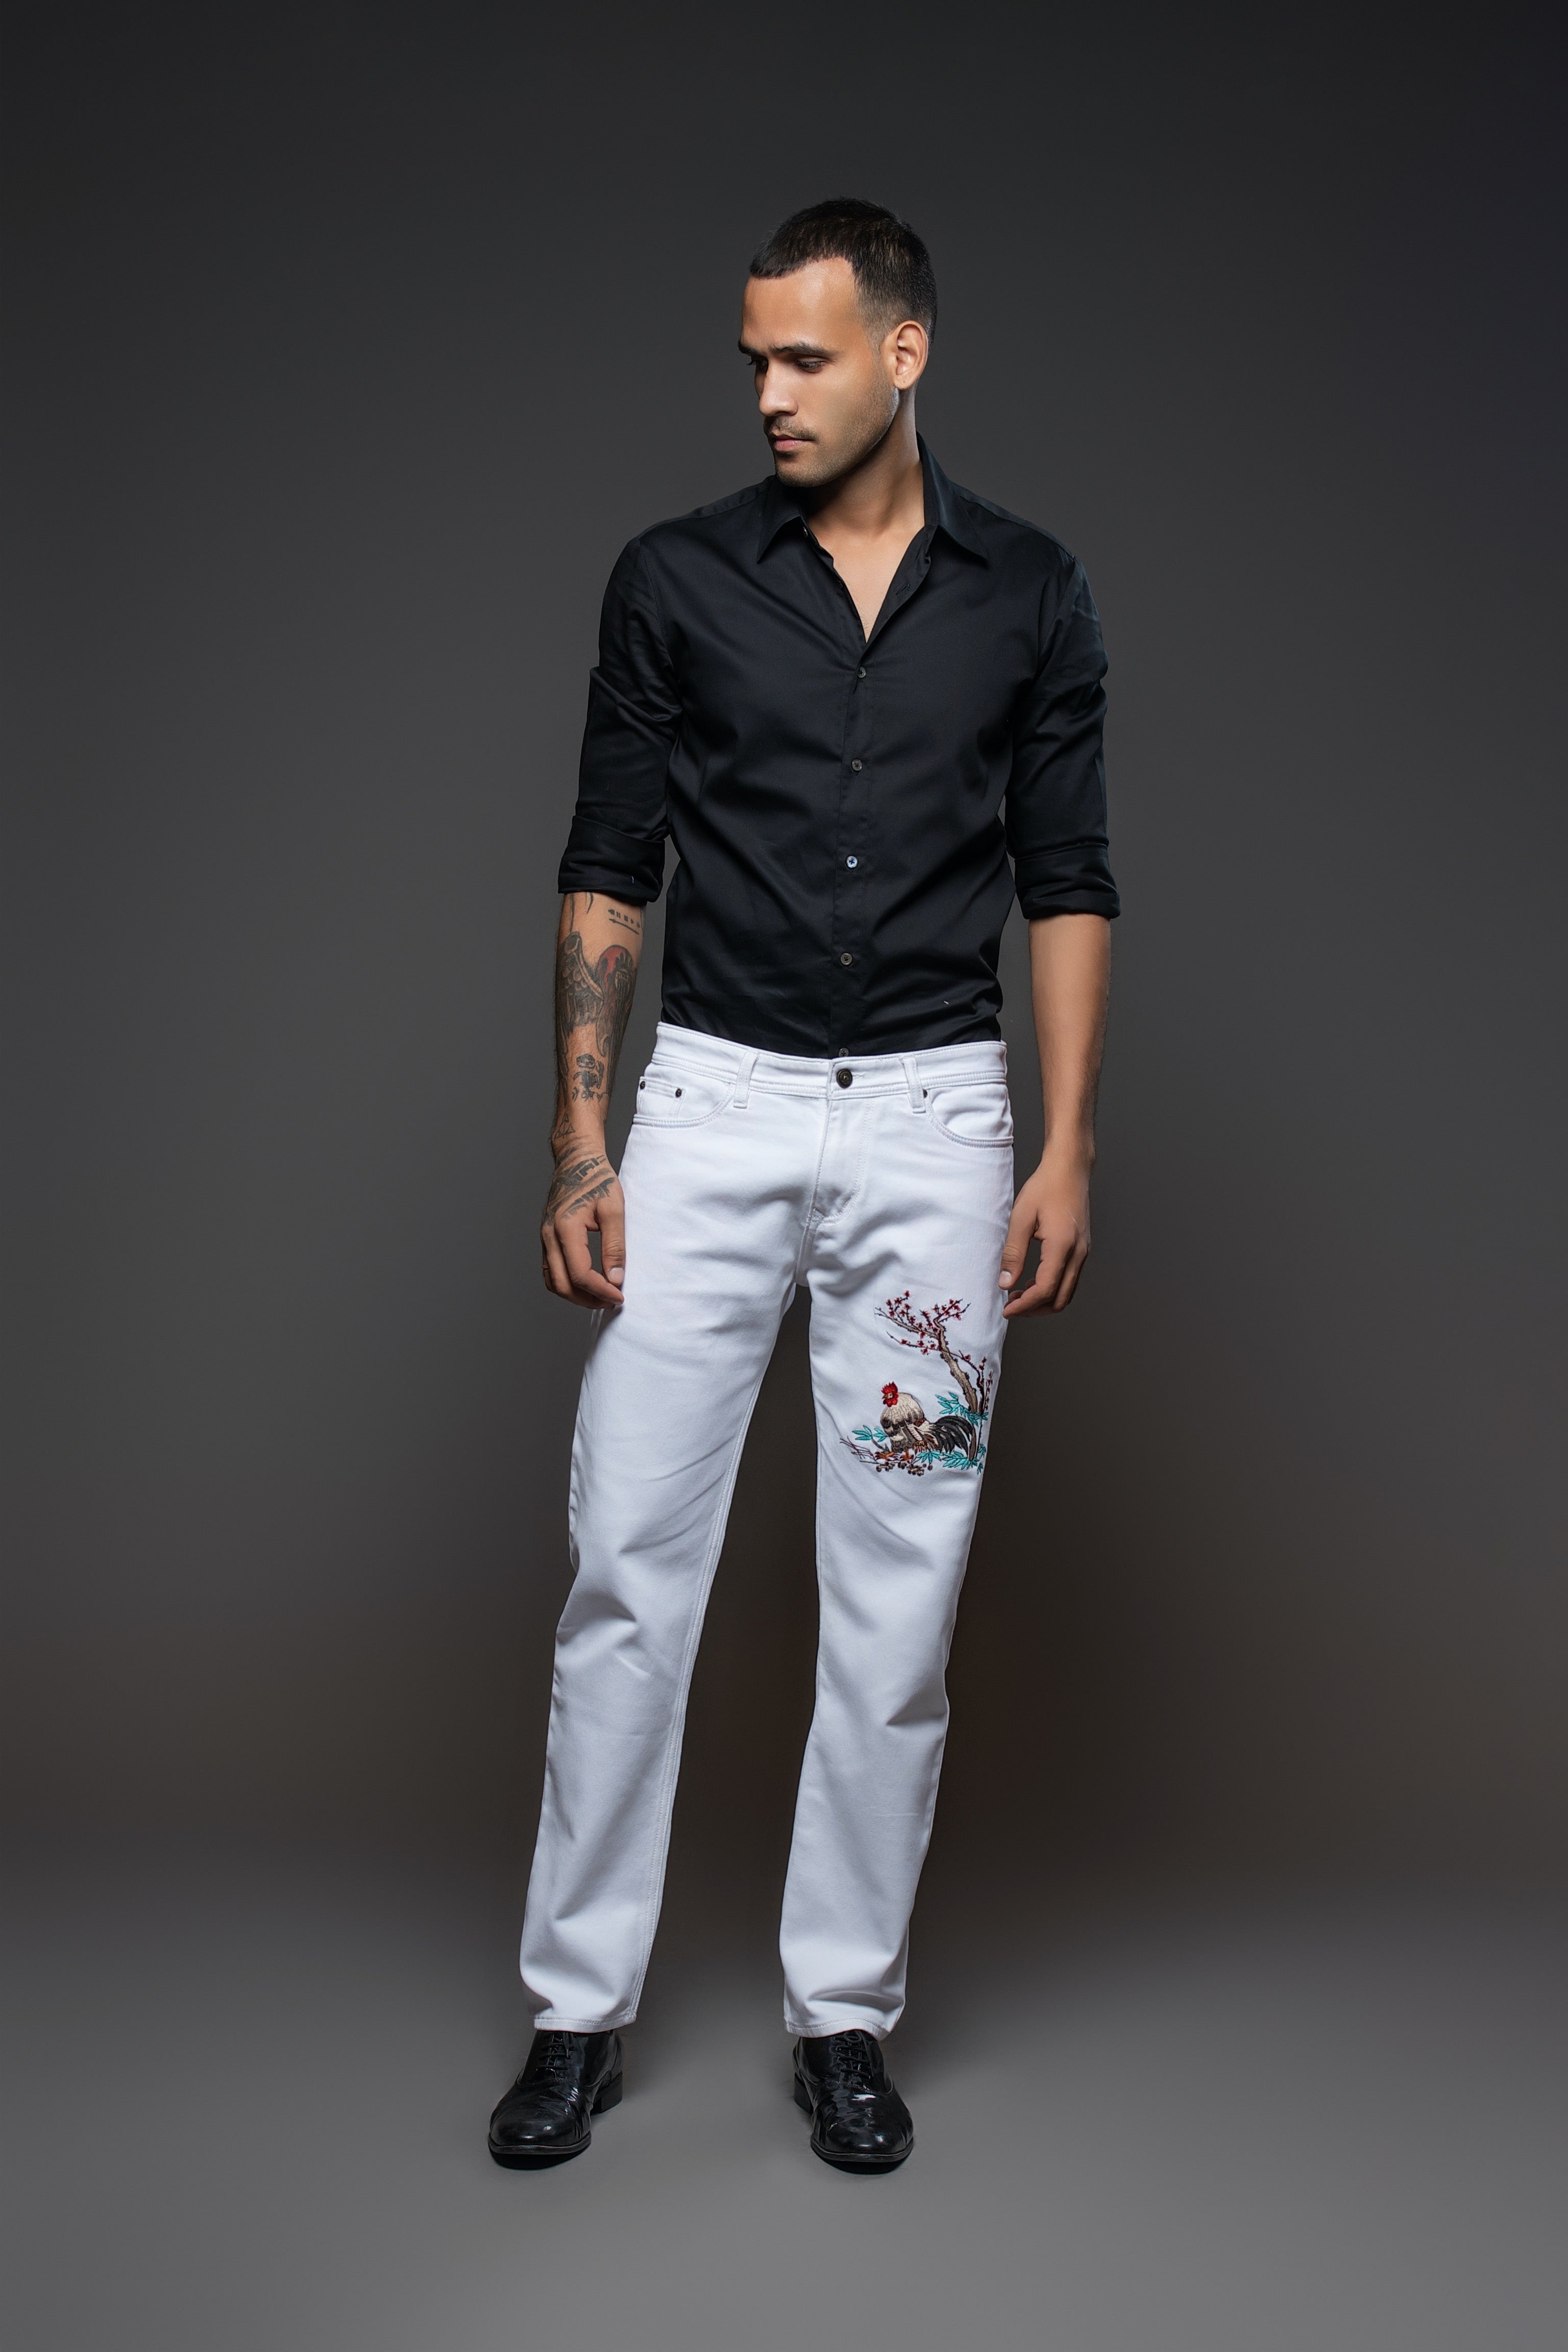 Light Off White Jeans with standing bird embroidery